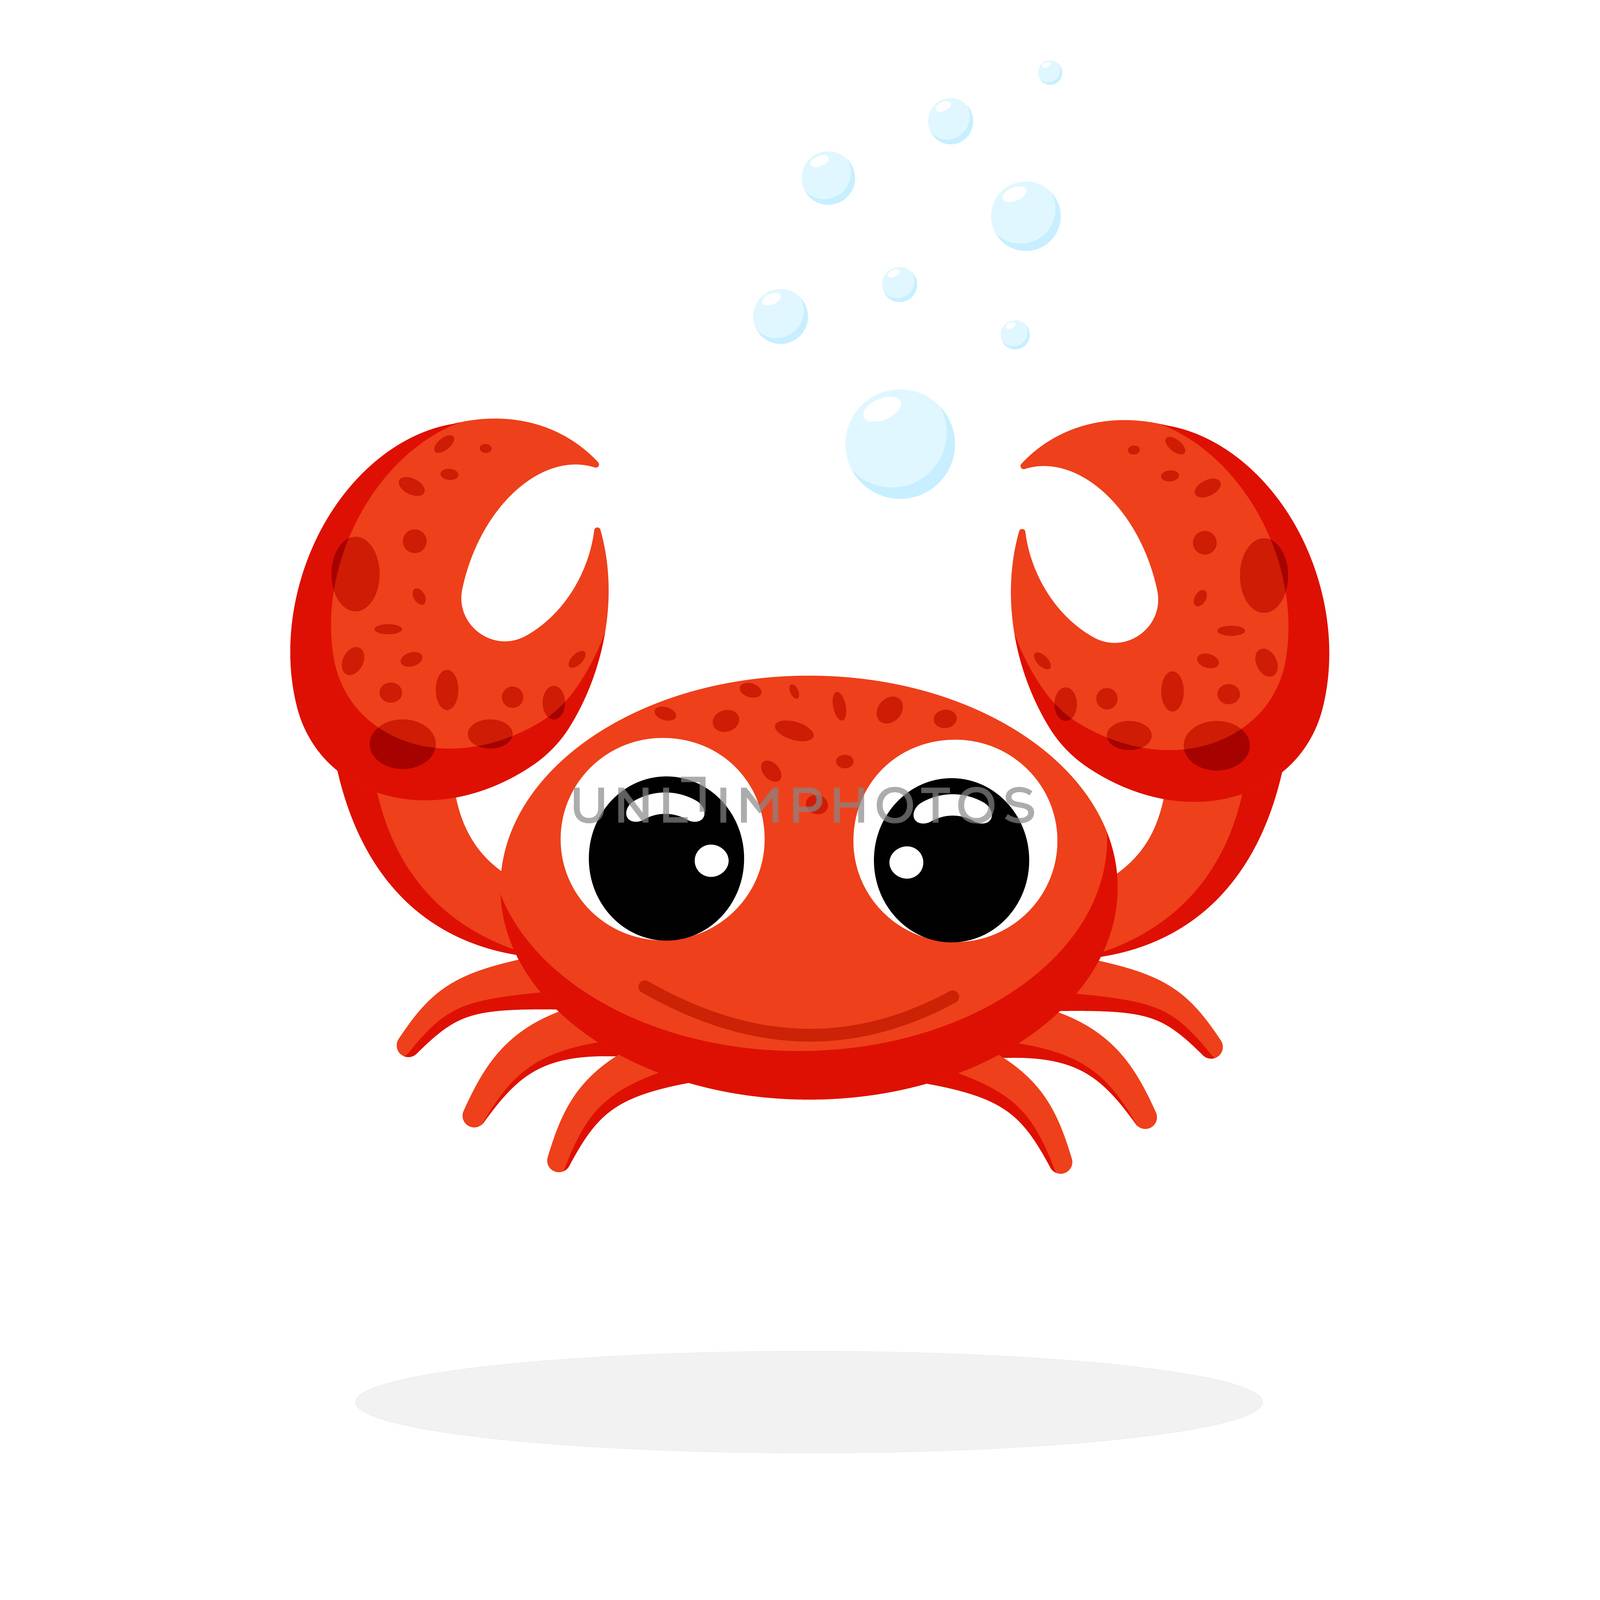 crab in flat style vector image